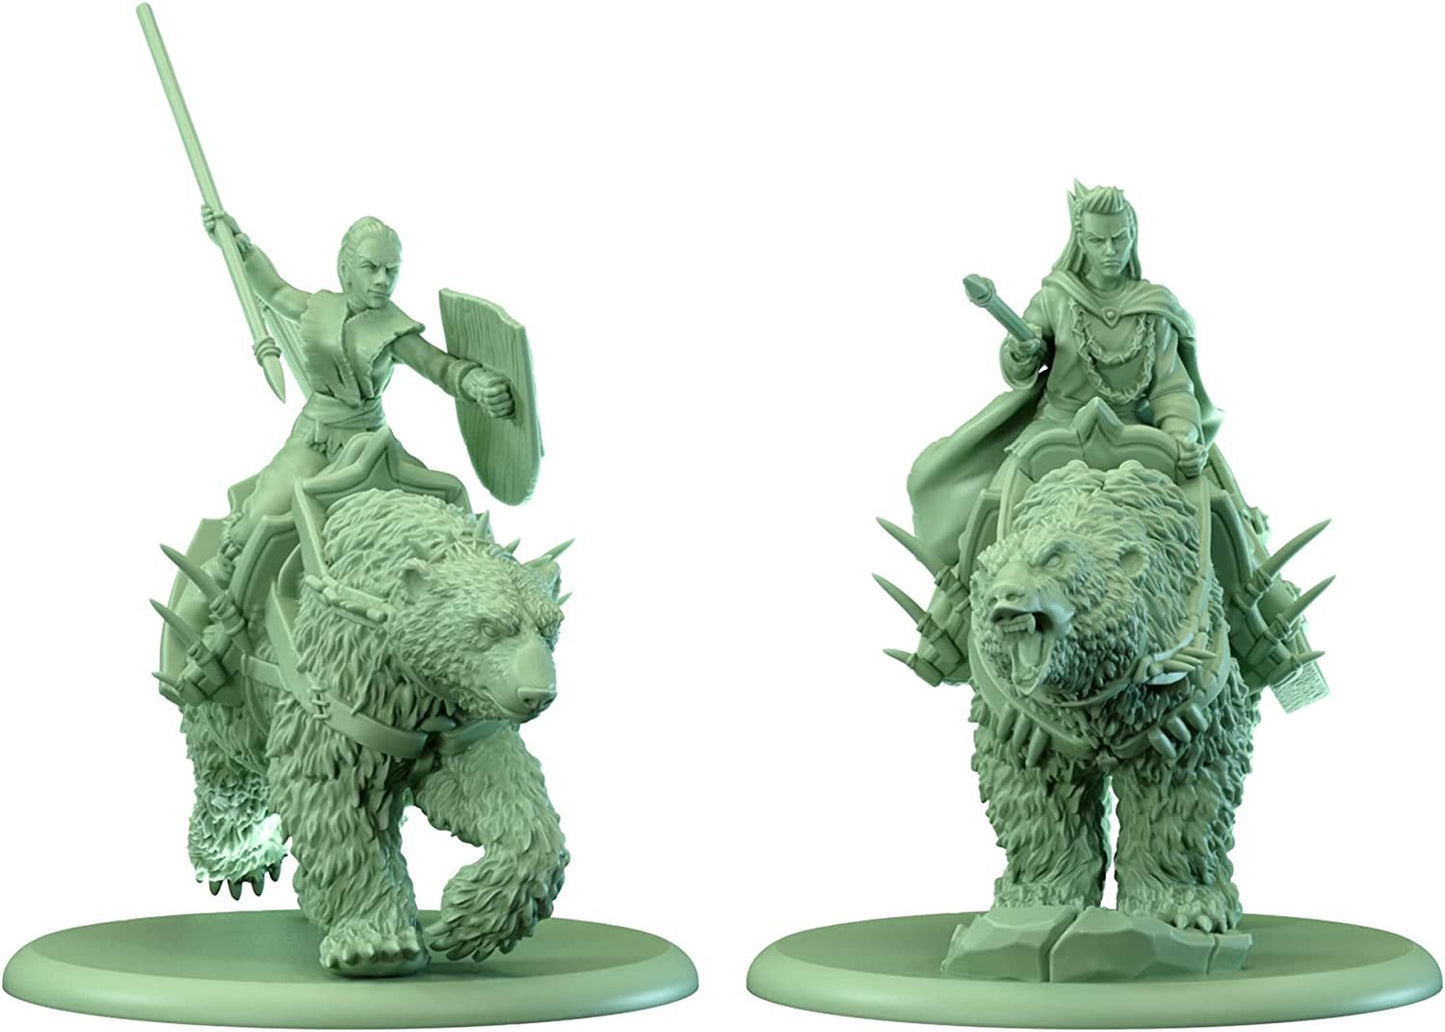 A Song of Ice and Fire - Free Folk: Frozen Shore Bear Riders